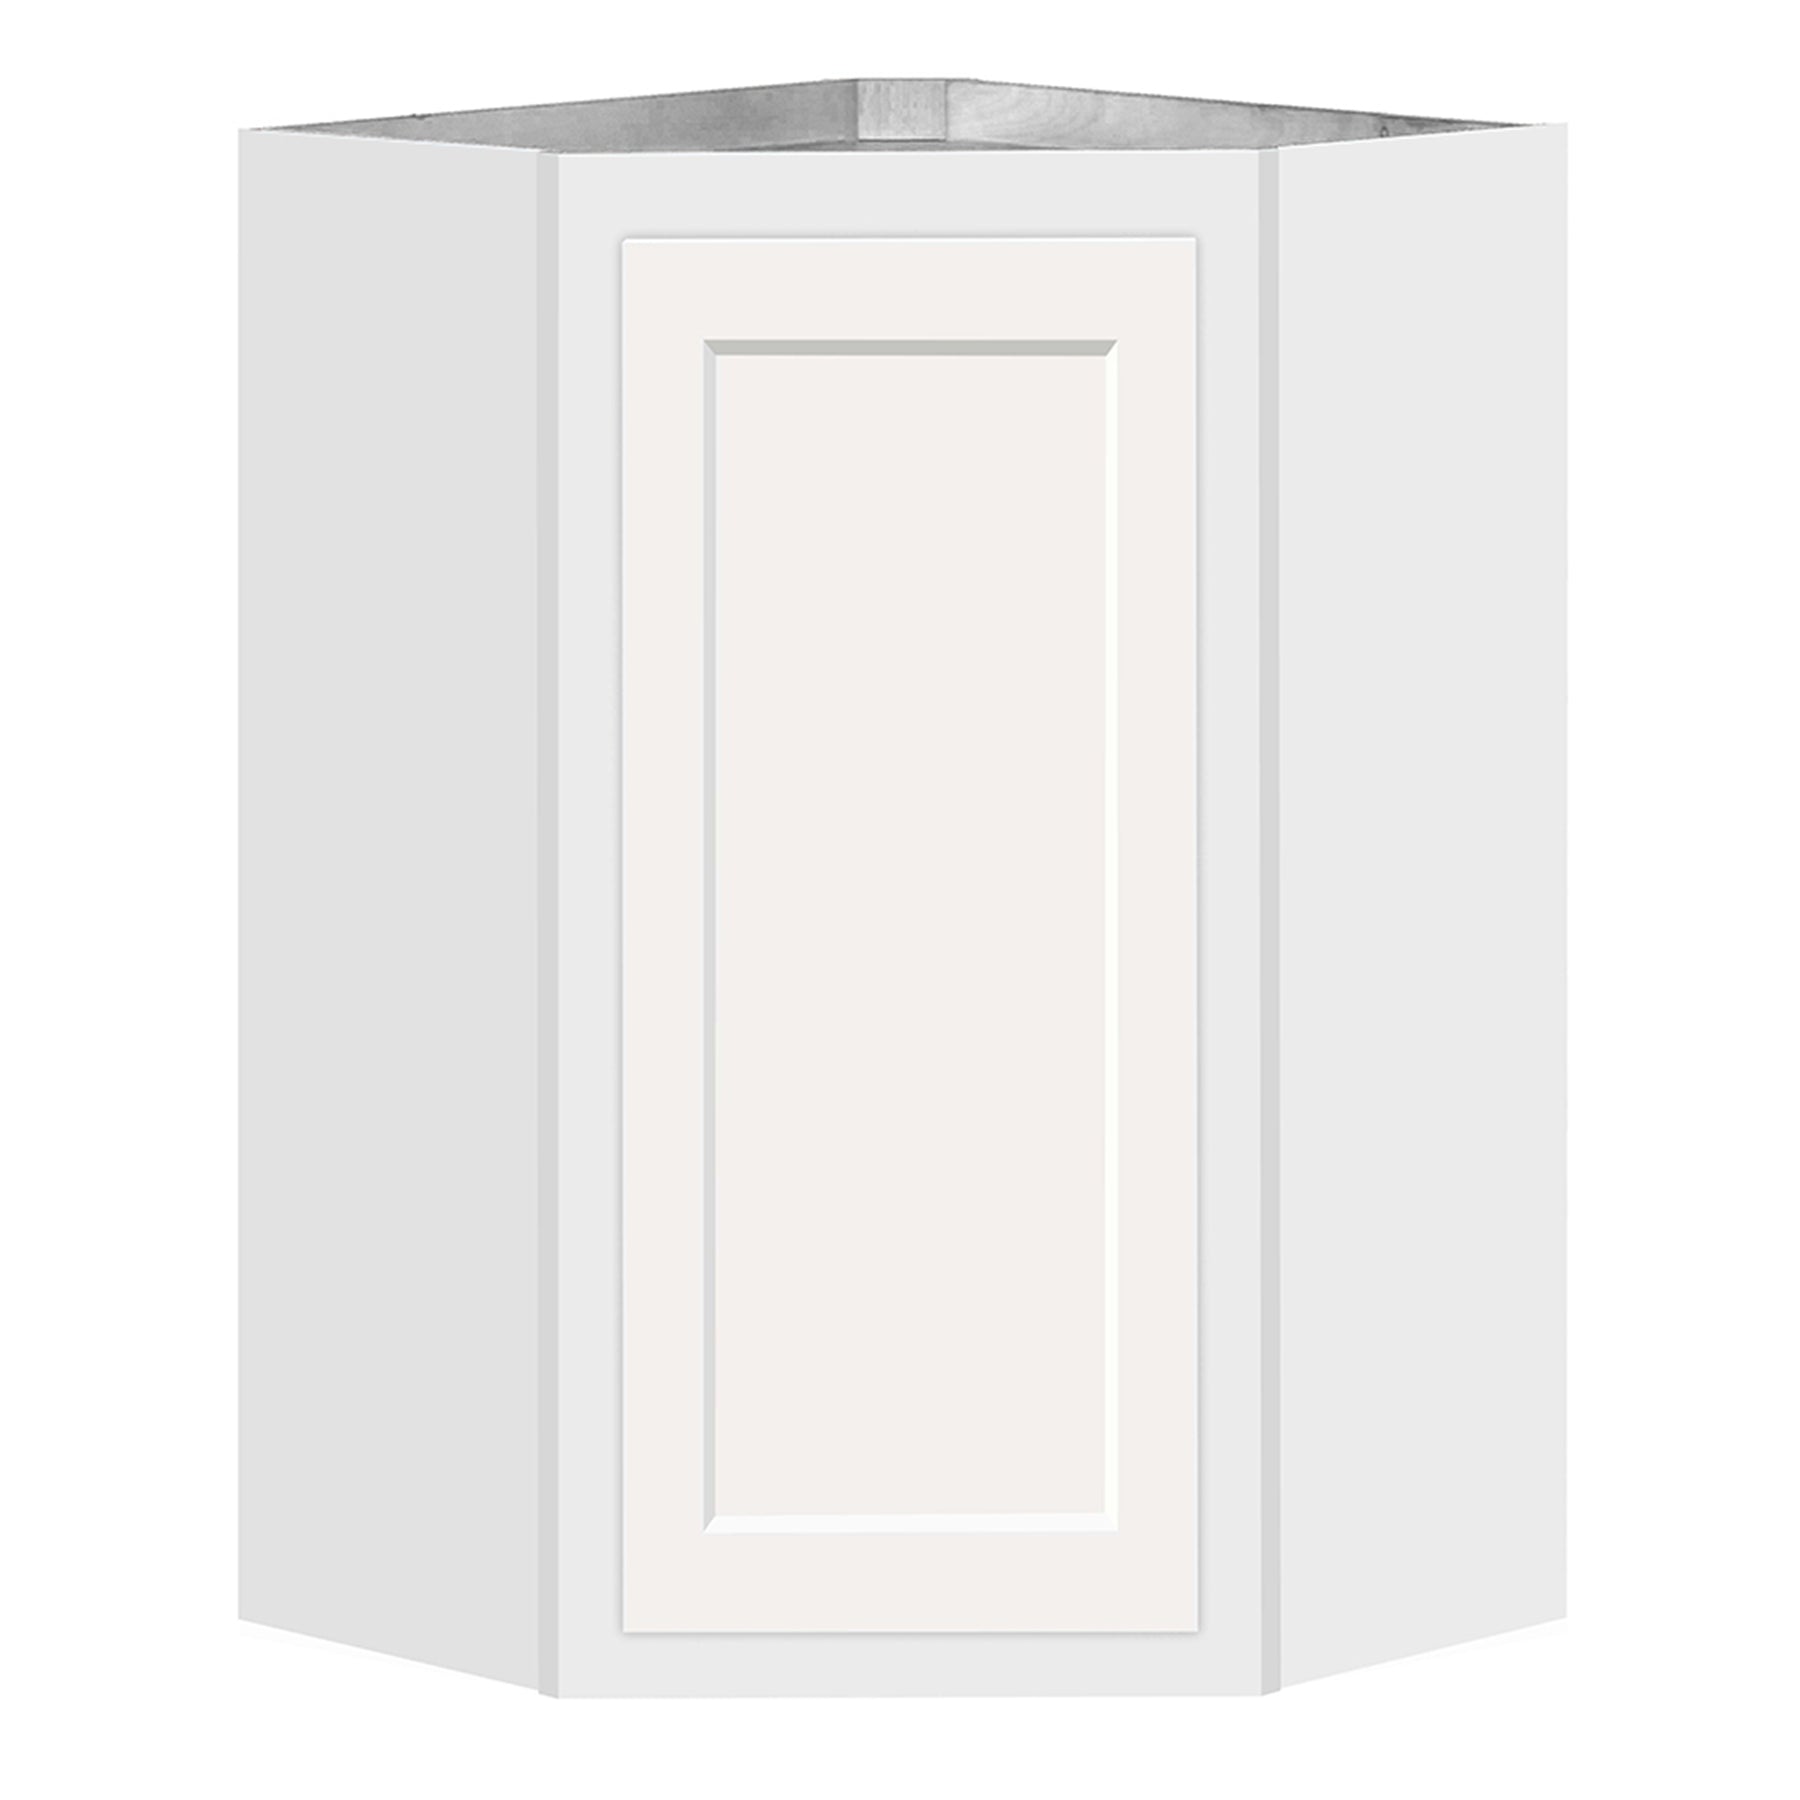 36 inch High Angle Wall Cabinet - Dwhite Shaker - 24 Inch W x 36 Inch H x 12 Inch D